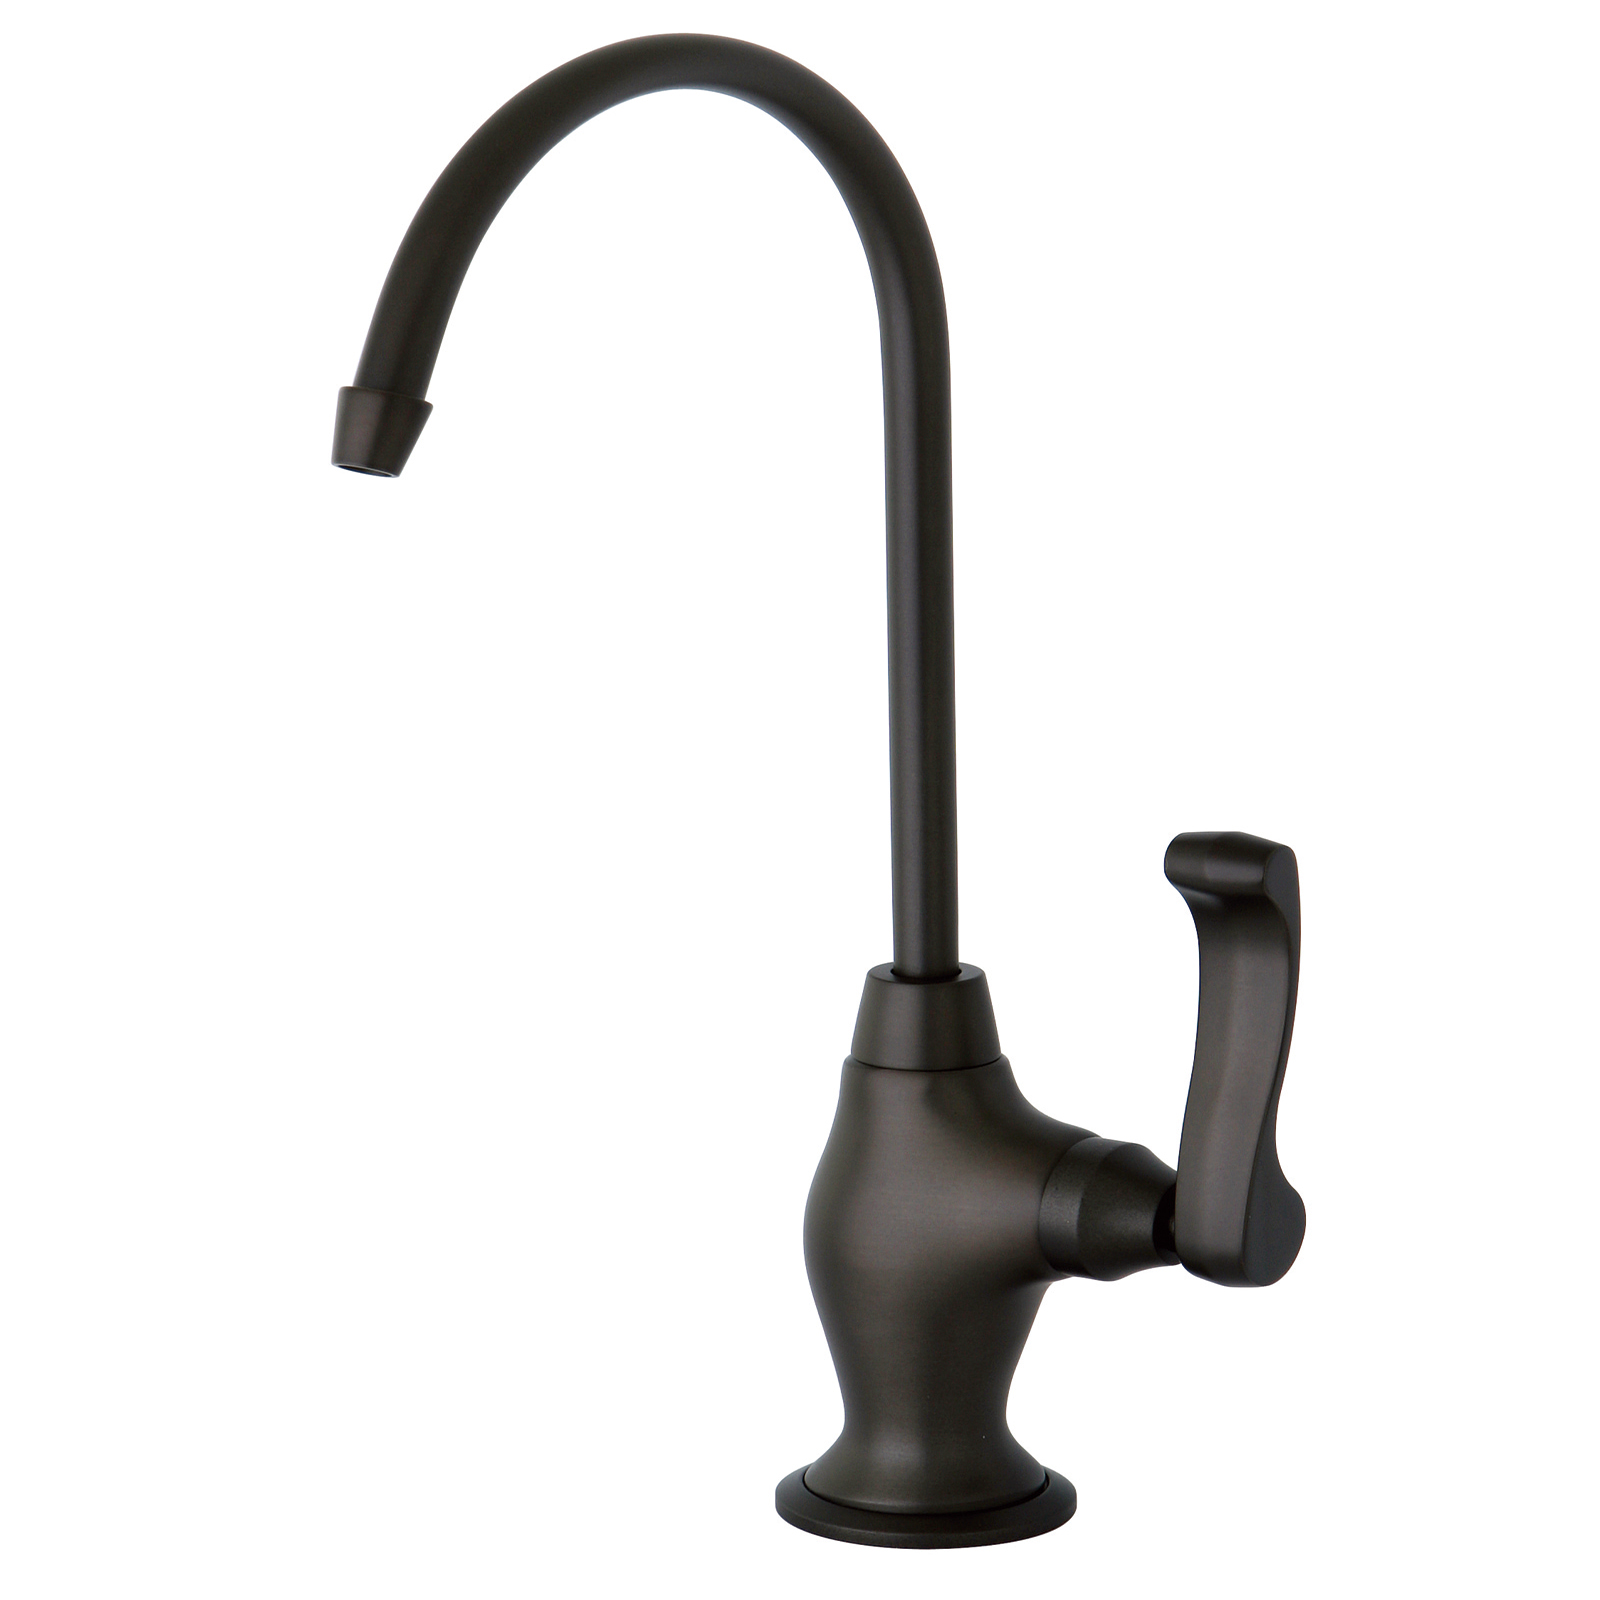 Kingston Brass KS3195FL Royale Cold Water Filtration Faucet, Oil Rubbed Bronze